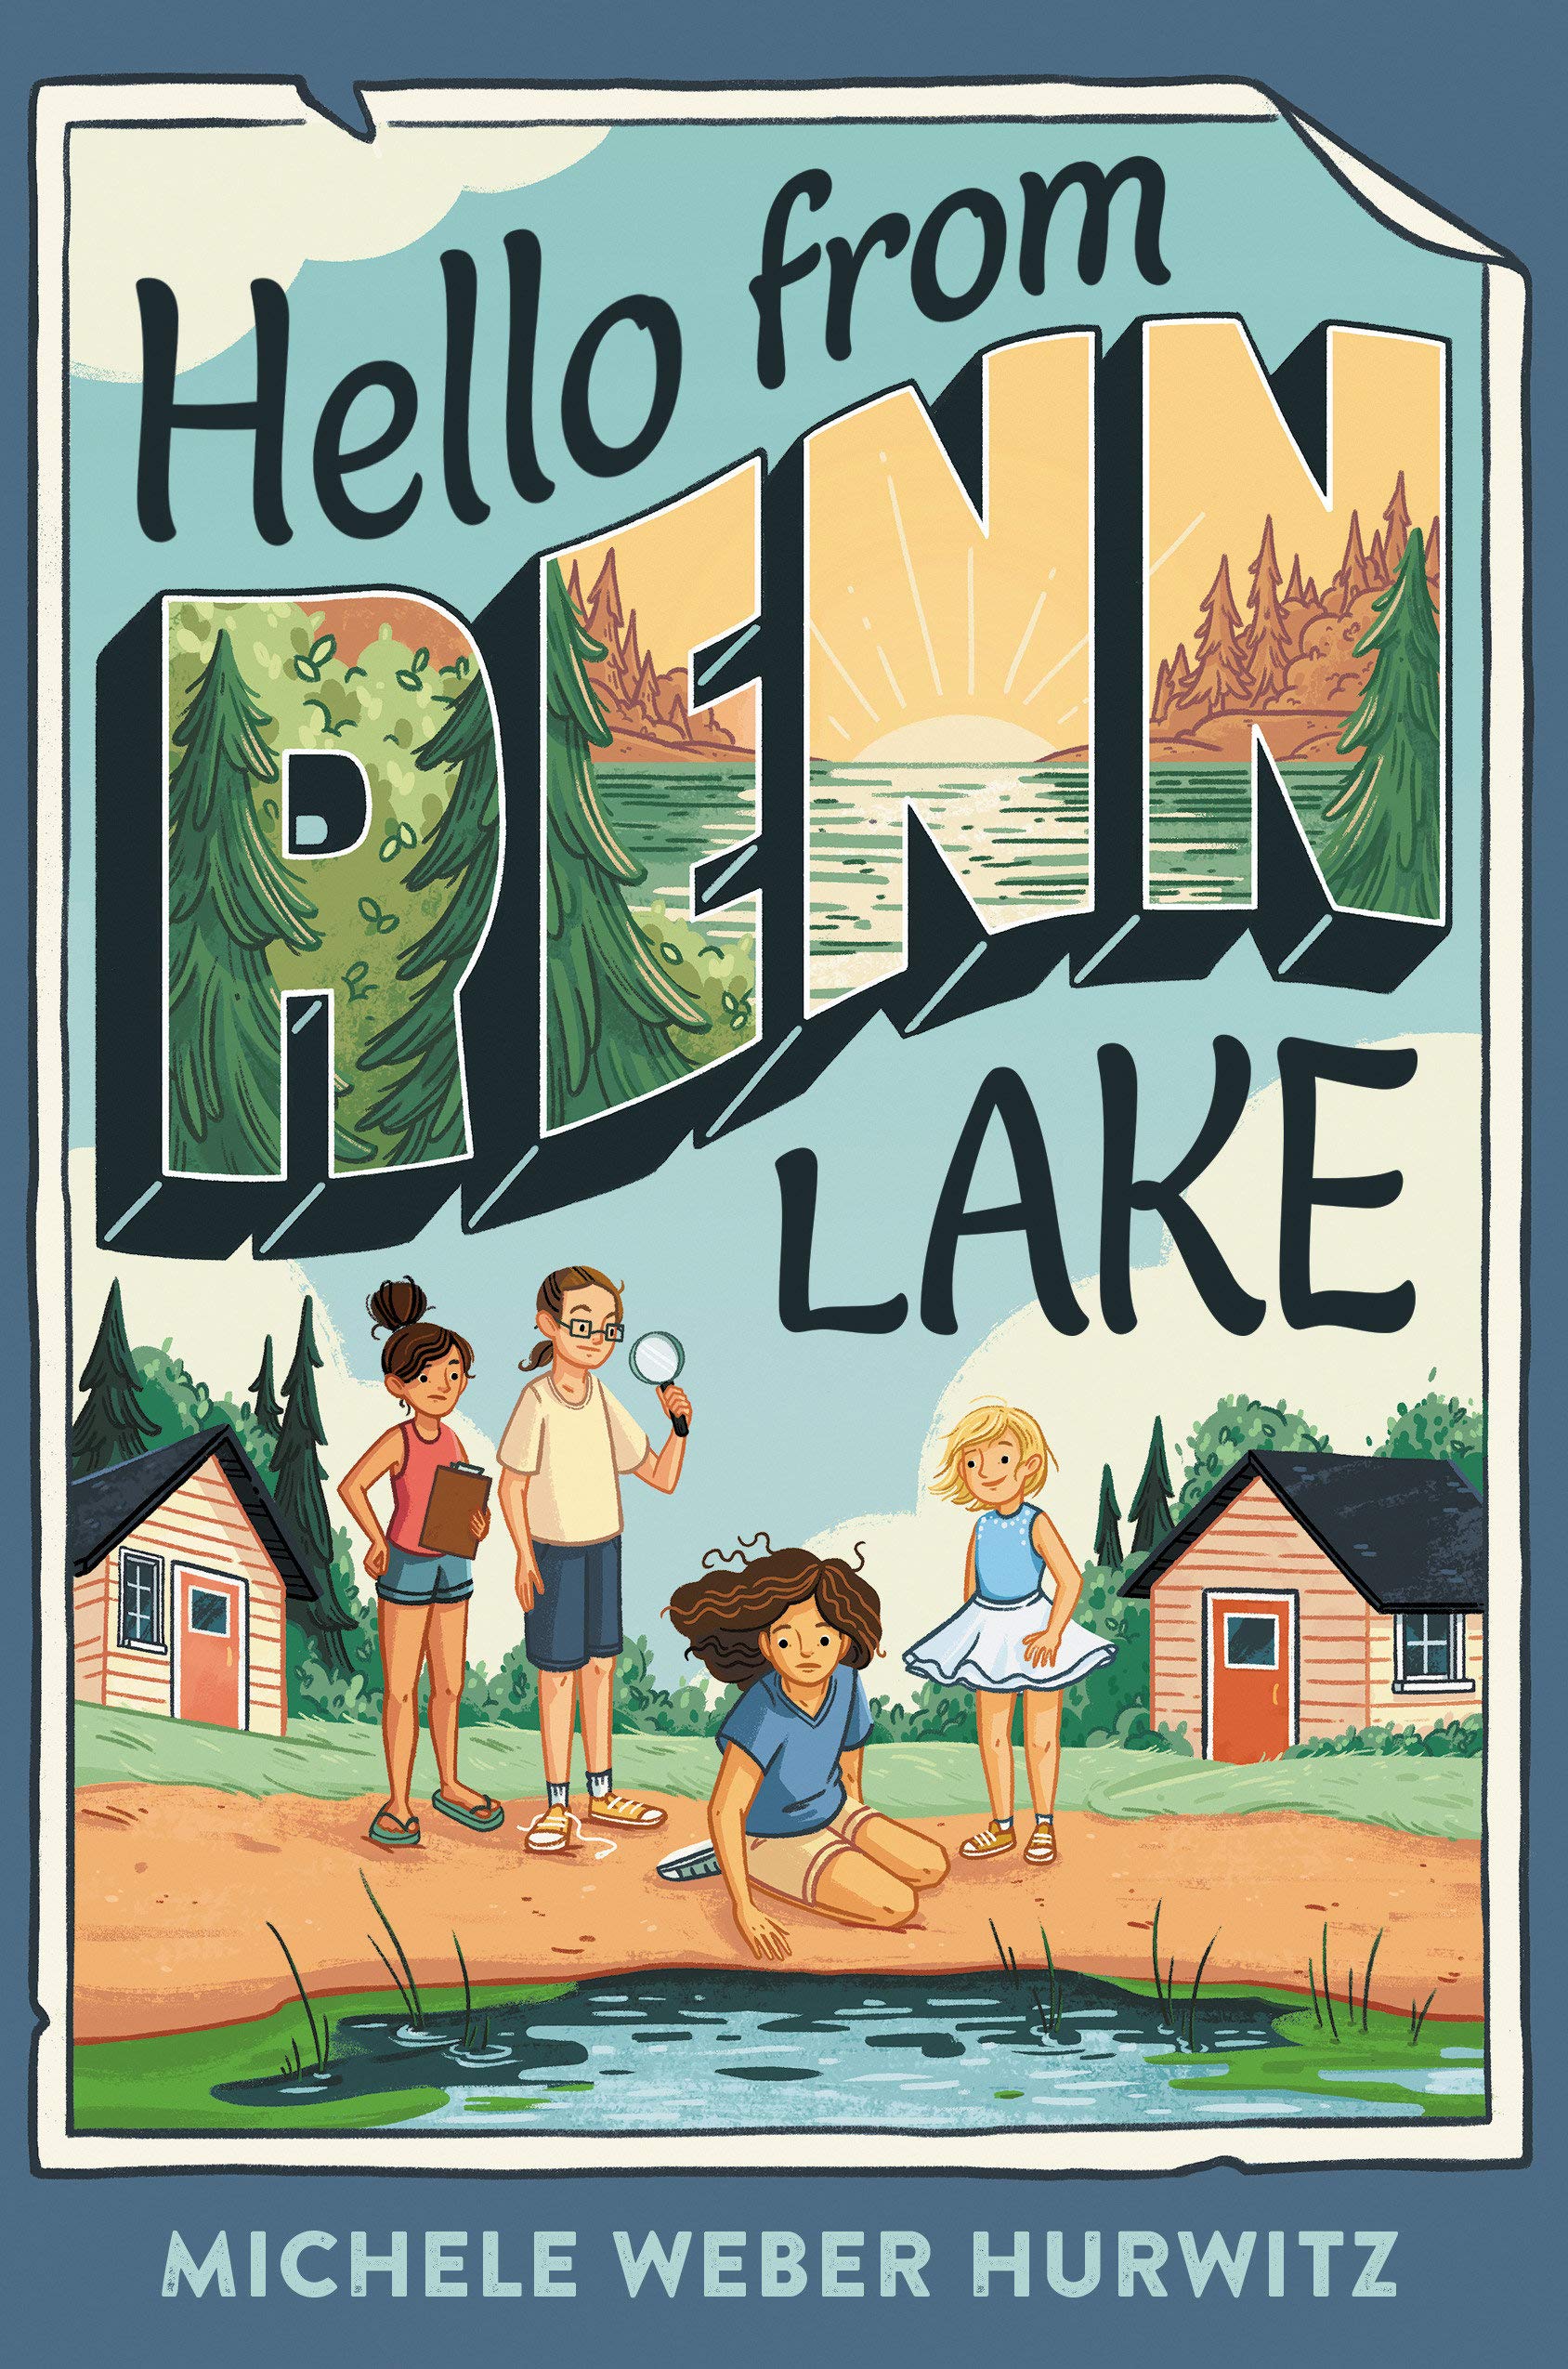 Read more about the article Hello from Renn Lake by Michele Weber Hurwitz